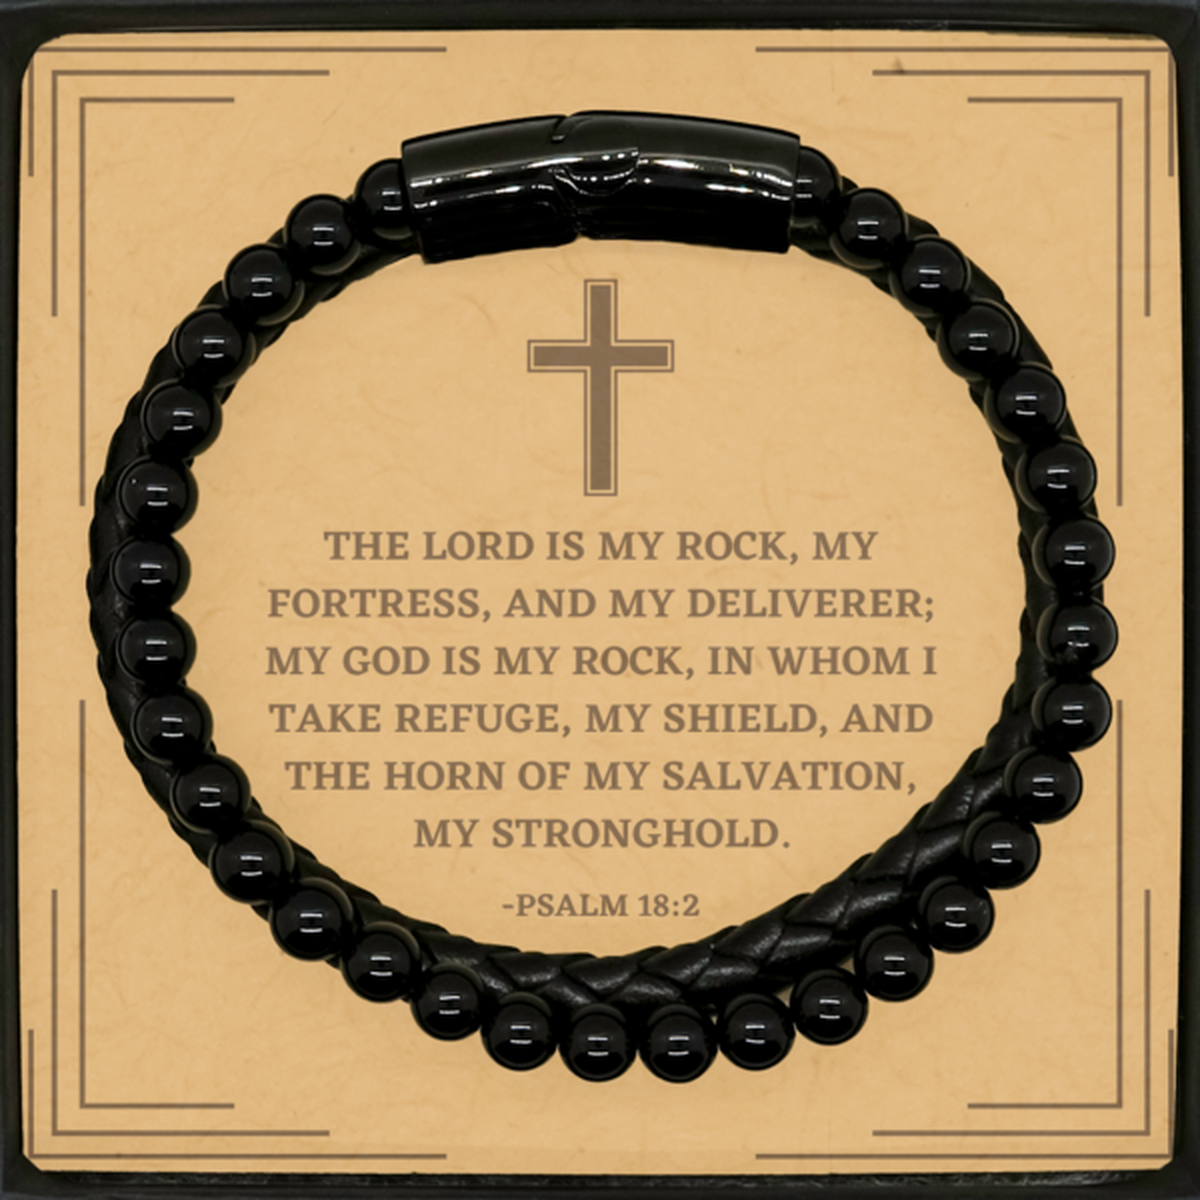 Baptism Gifts For Teenage Boys Girls, Christian Bible Verse Stone Leather Bracelet, The Lord is my rock, Confirmation Gifts, Bible Verse Card for Son, Godson, Grandson